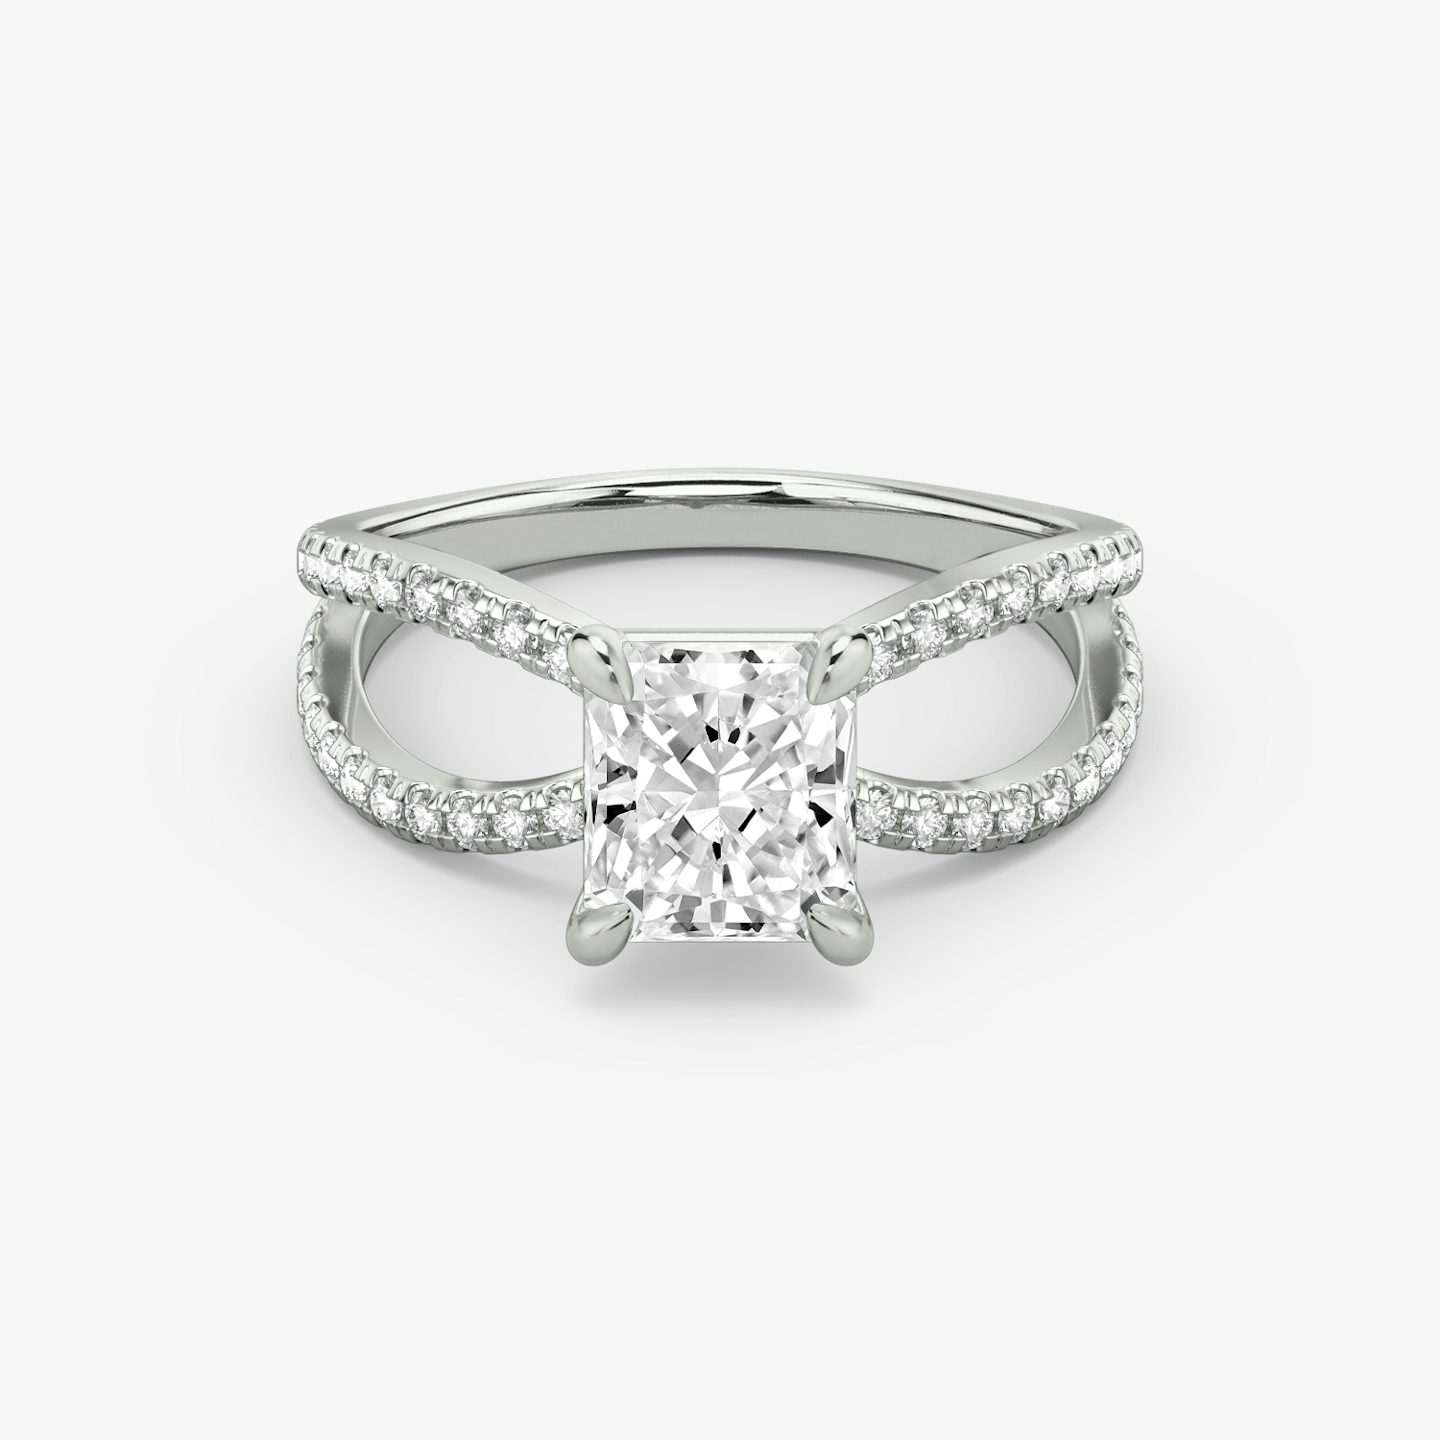 The Duet Radiant Engagement Ring